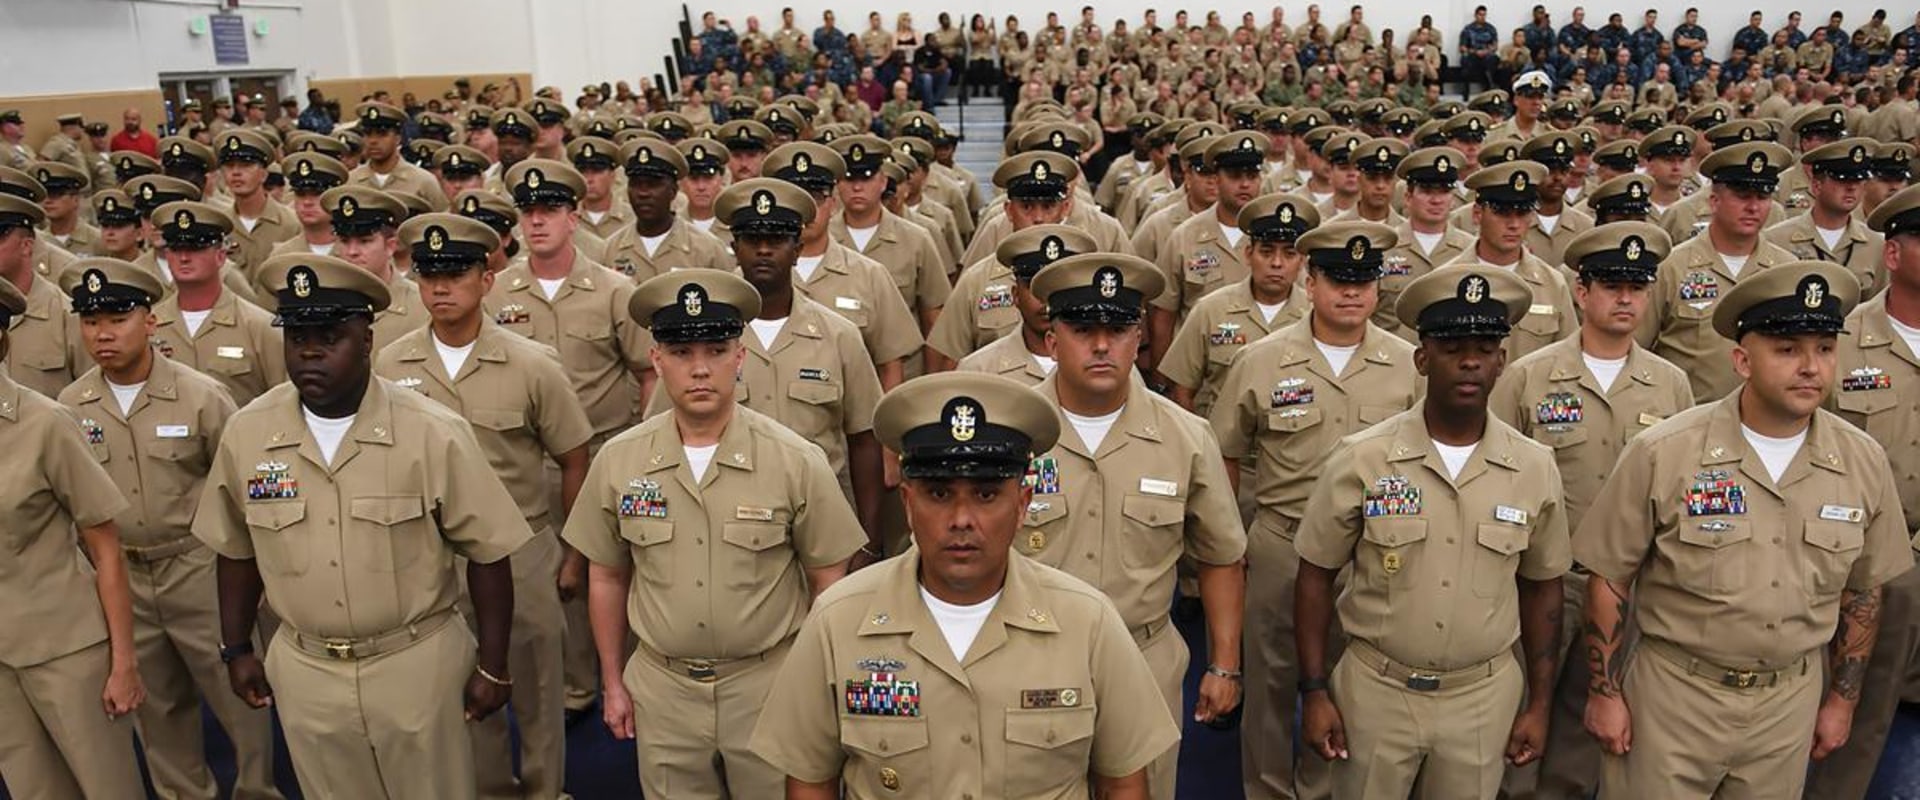 Is a chief petty officer a high rank?